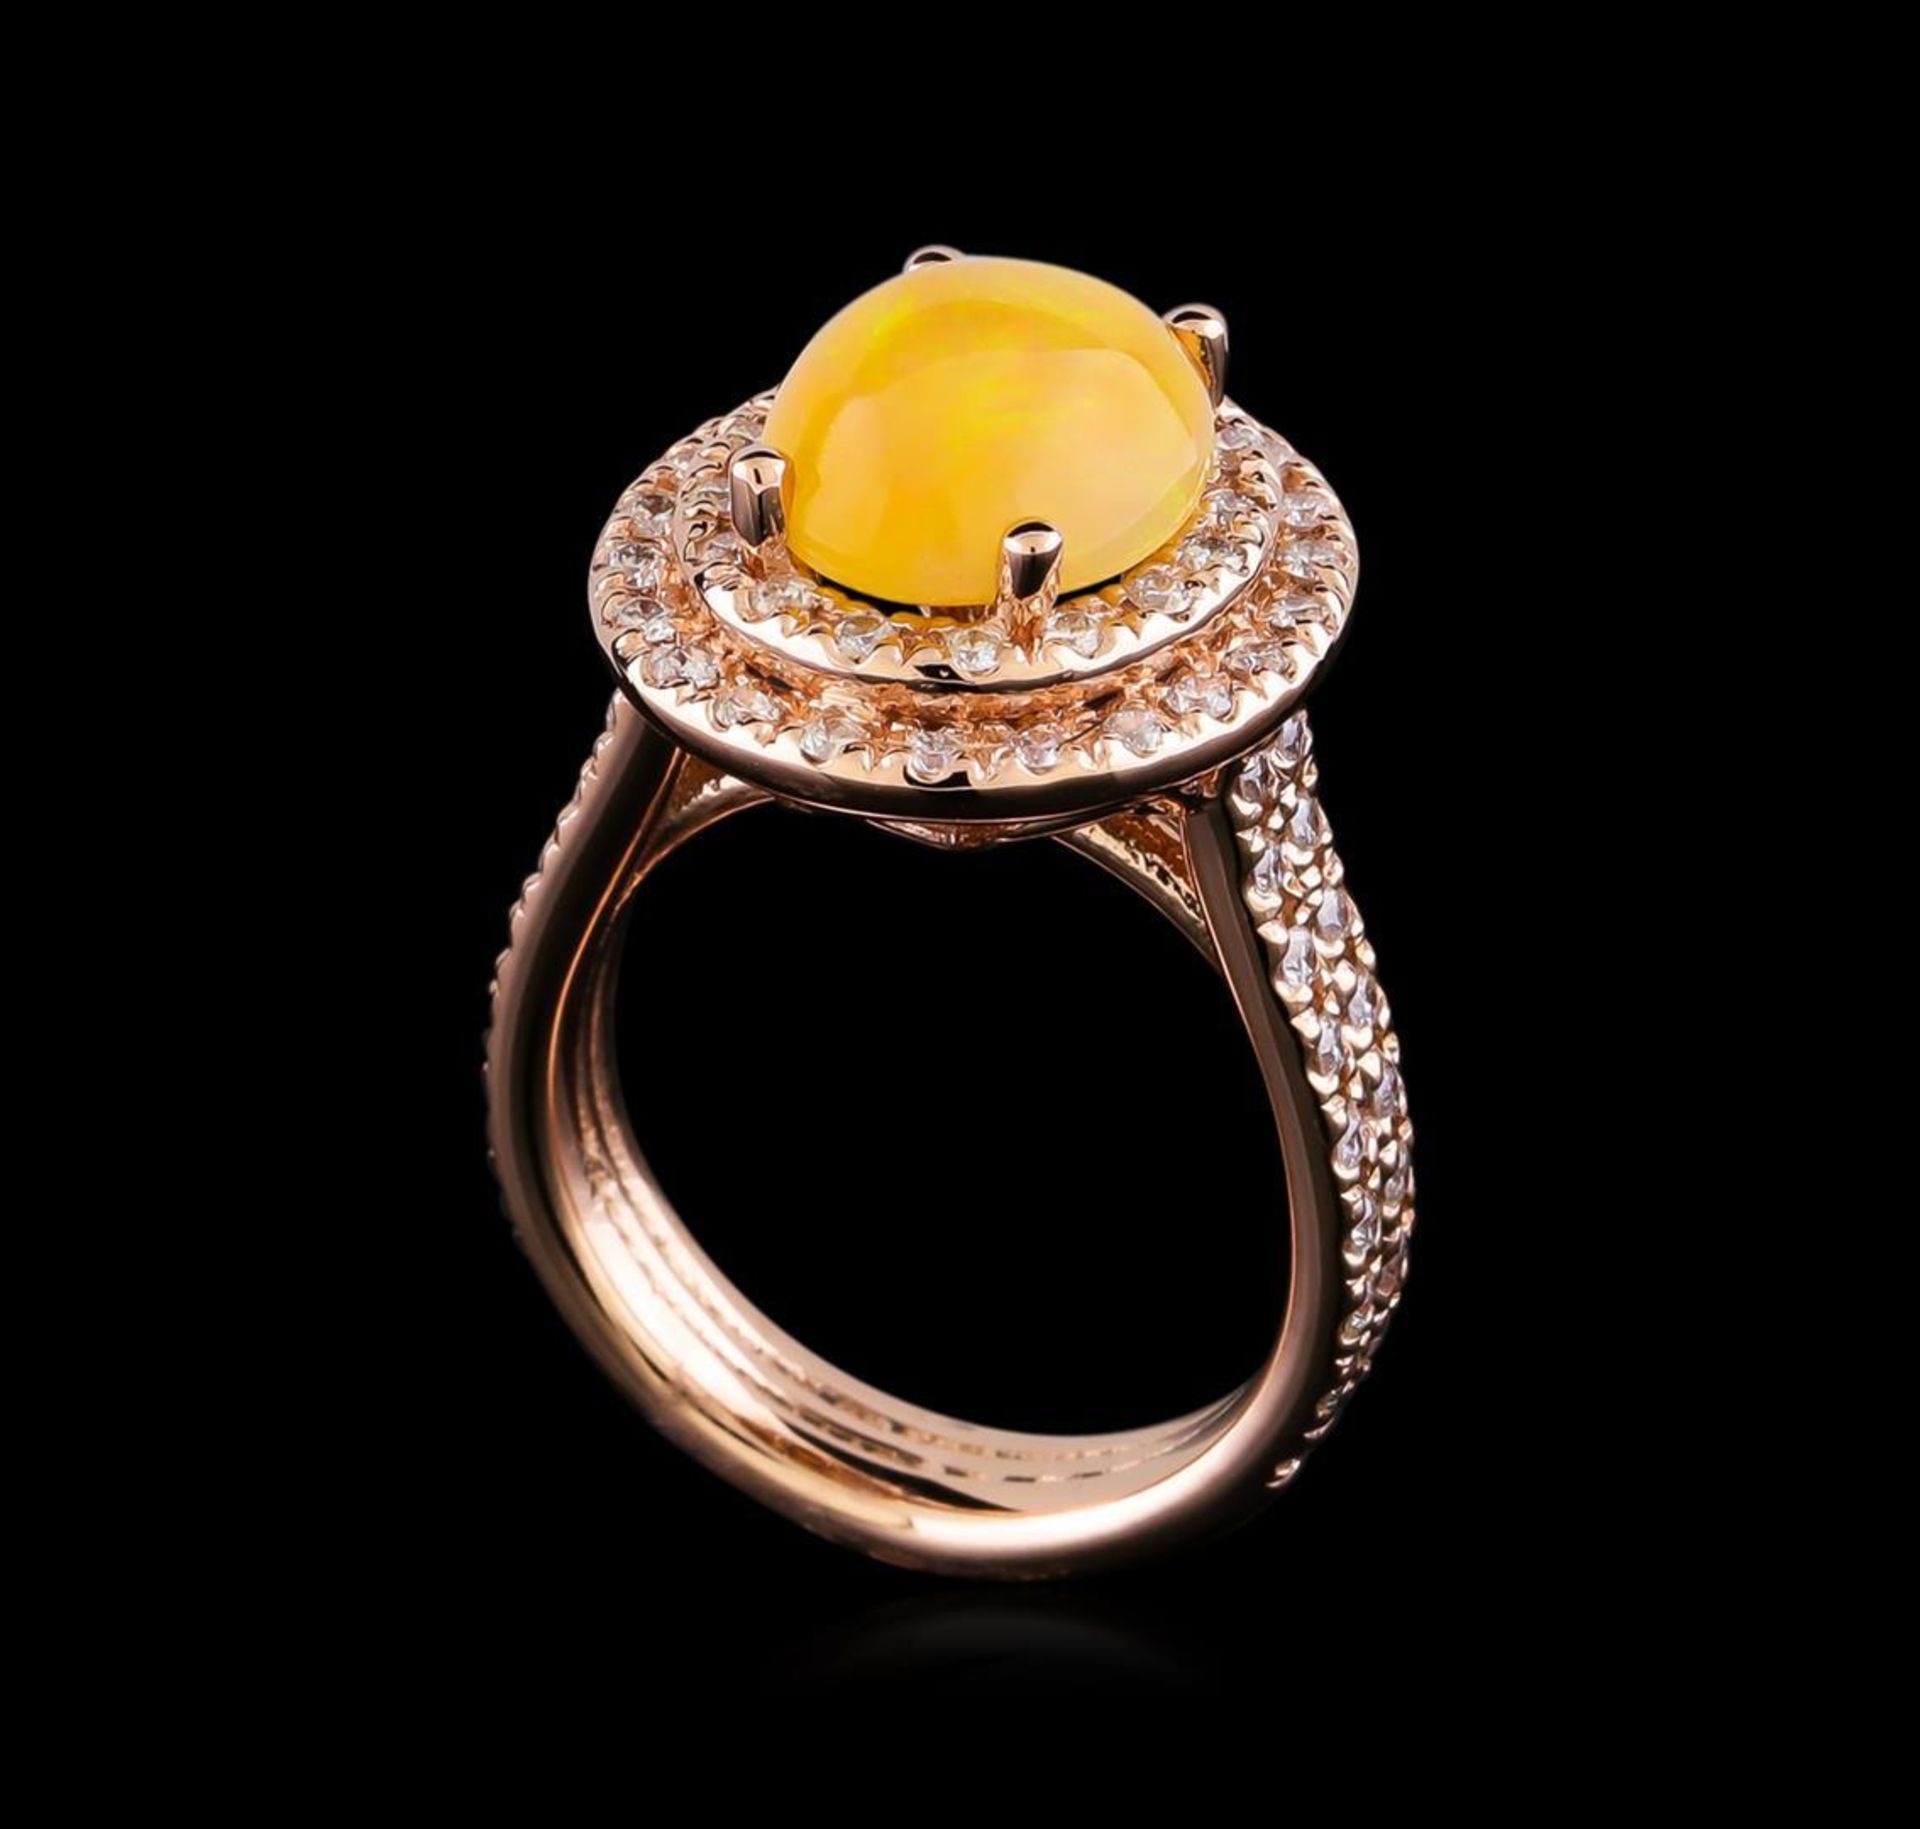 2.40 ctw Opal and Diamond Ring - 14KT Rose Gold - Image 4 of 5